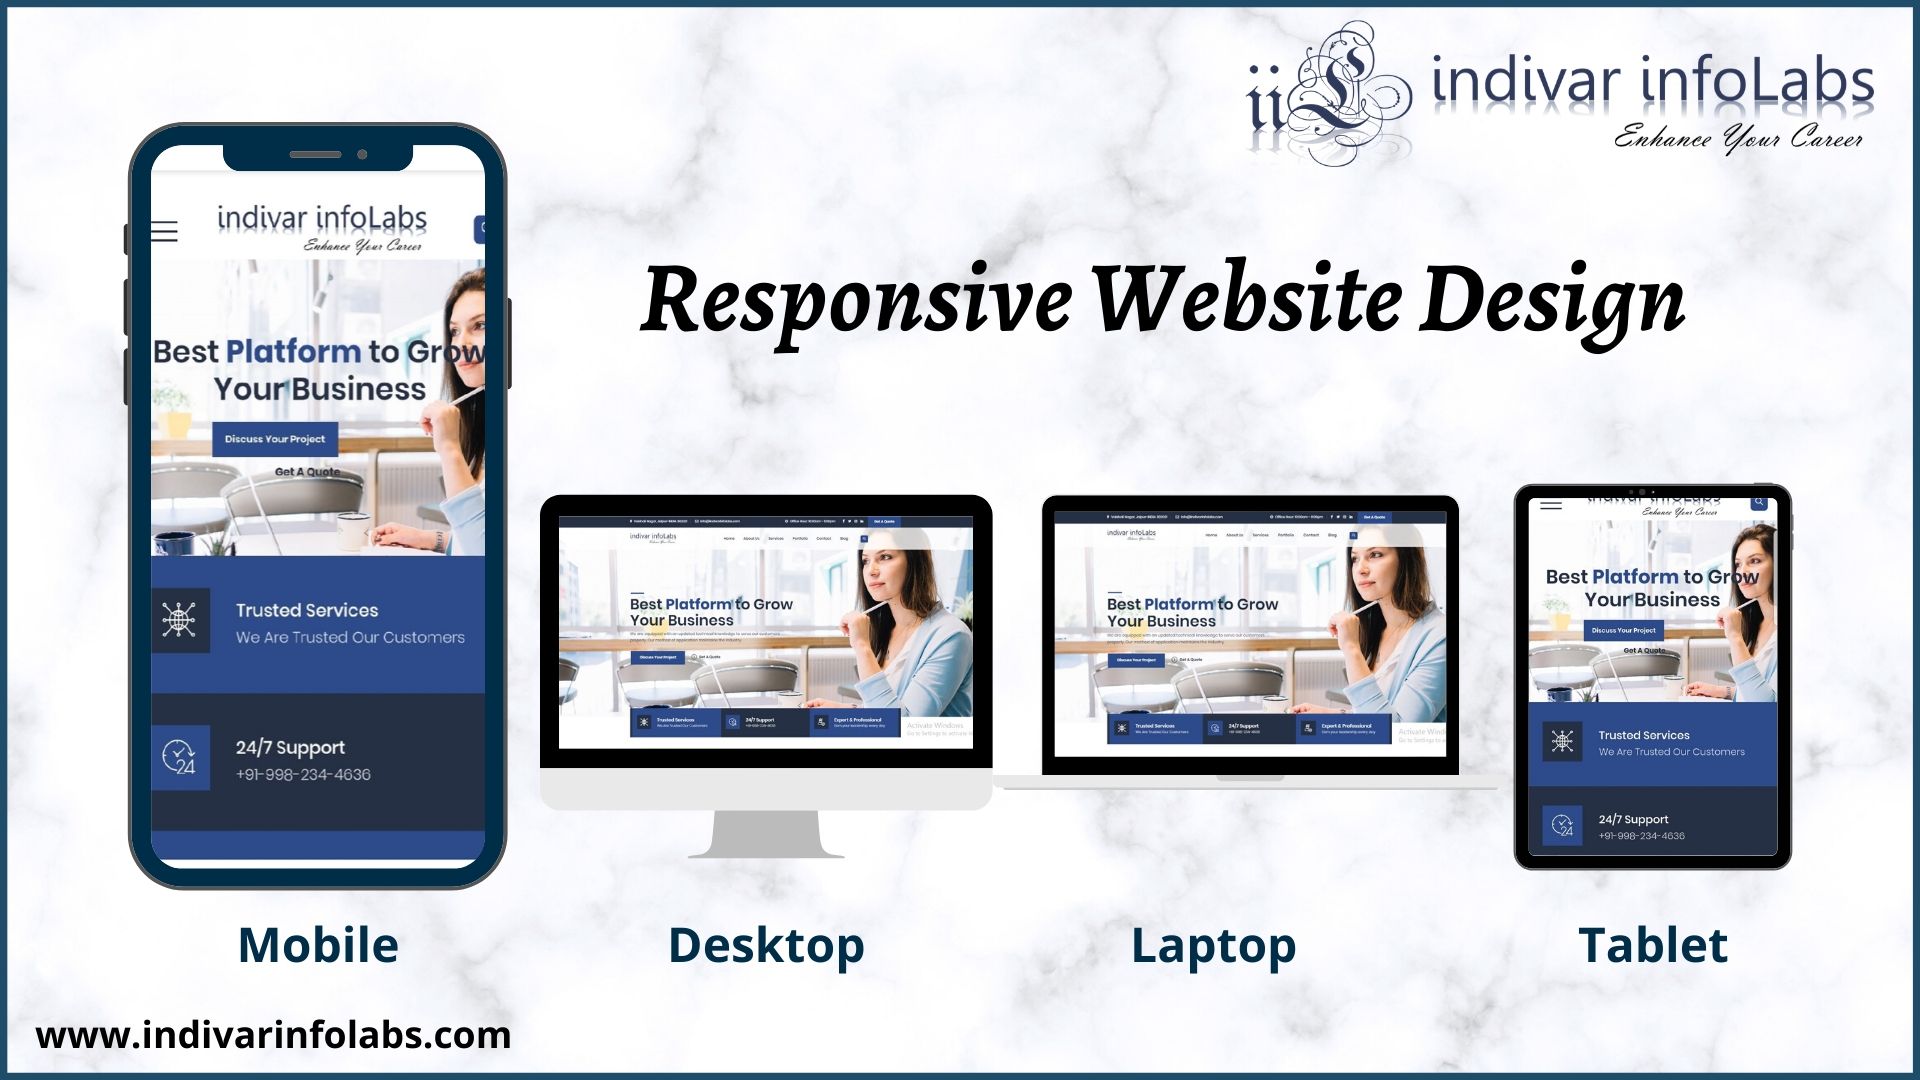 Why Responsive Design of Website is Important for Business in this ERA?